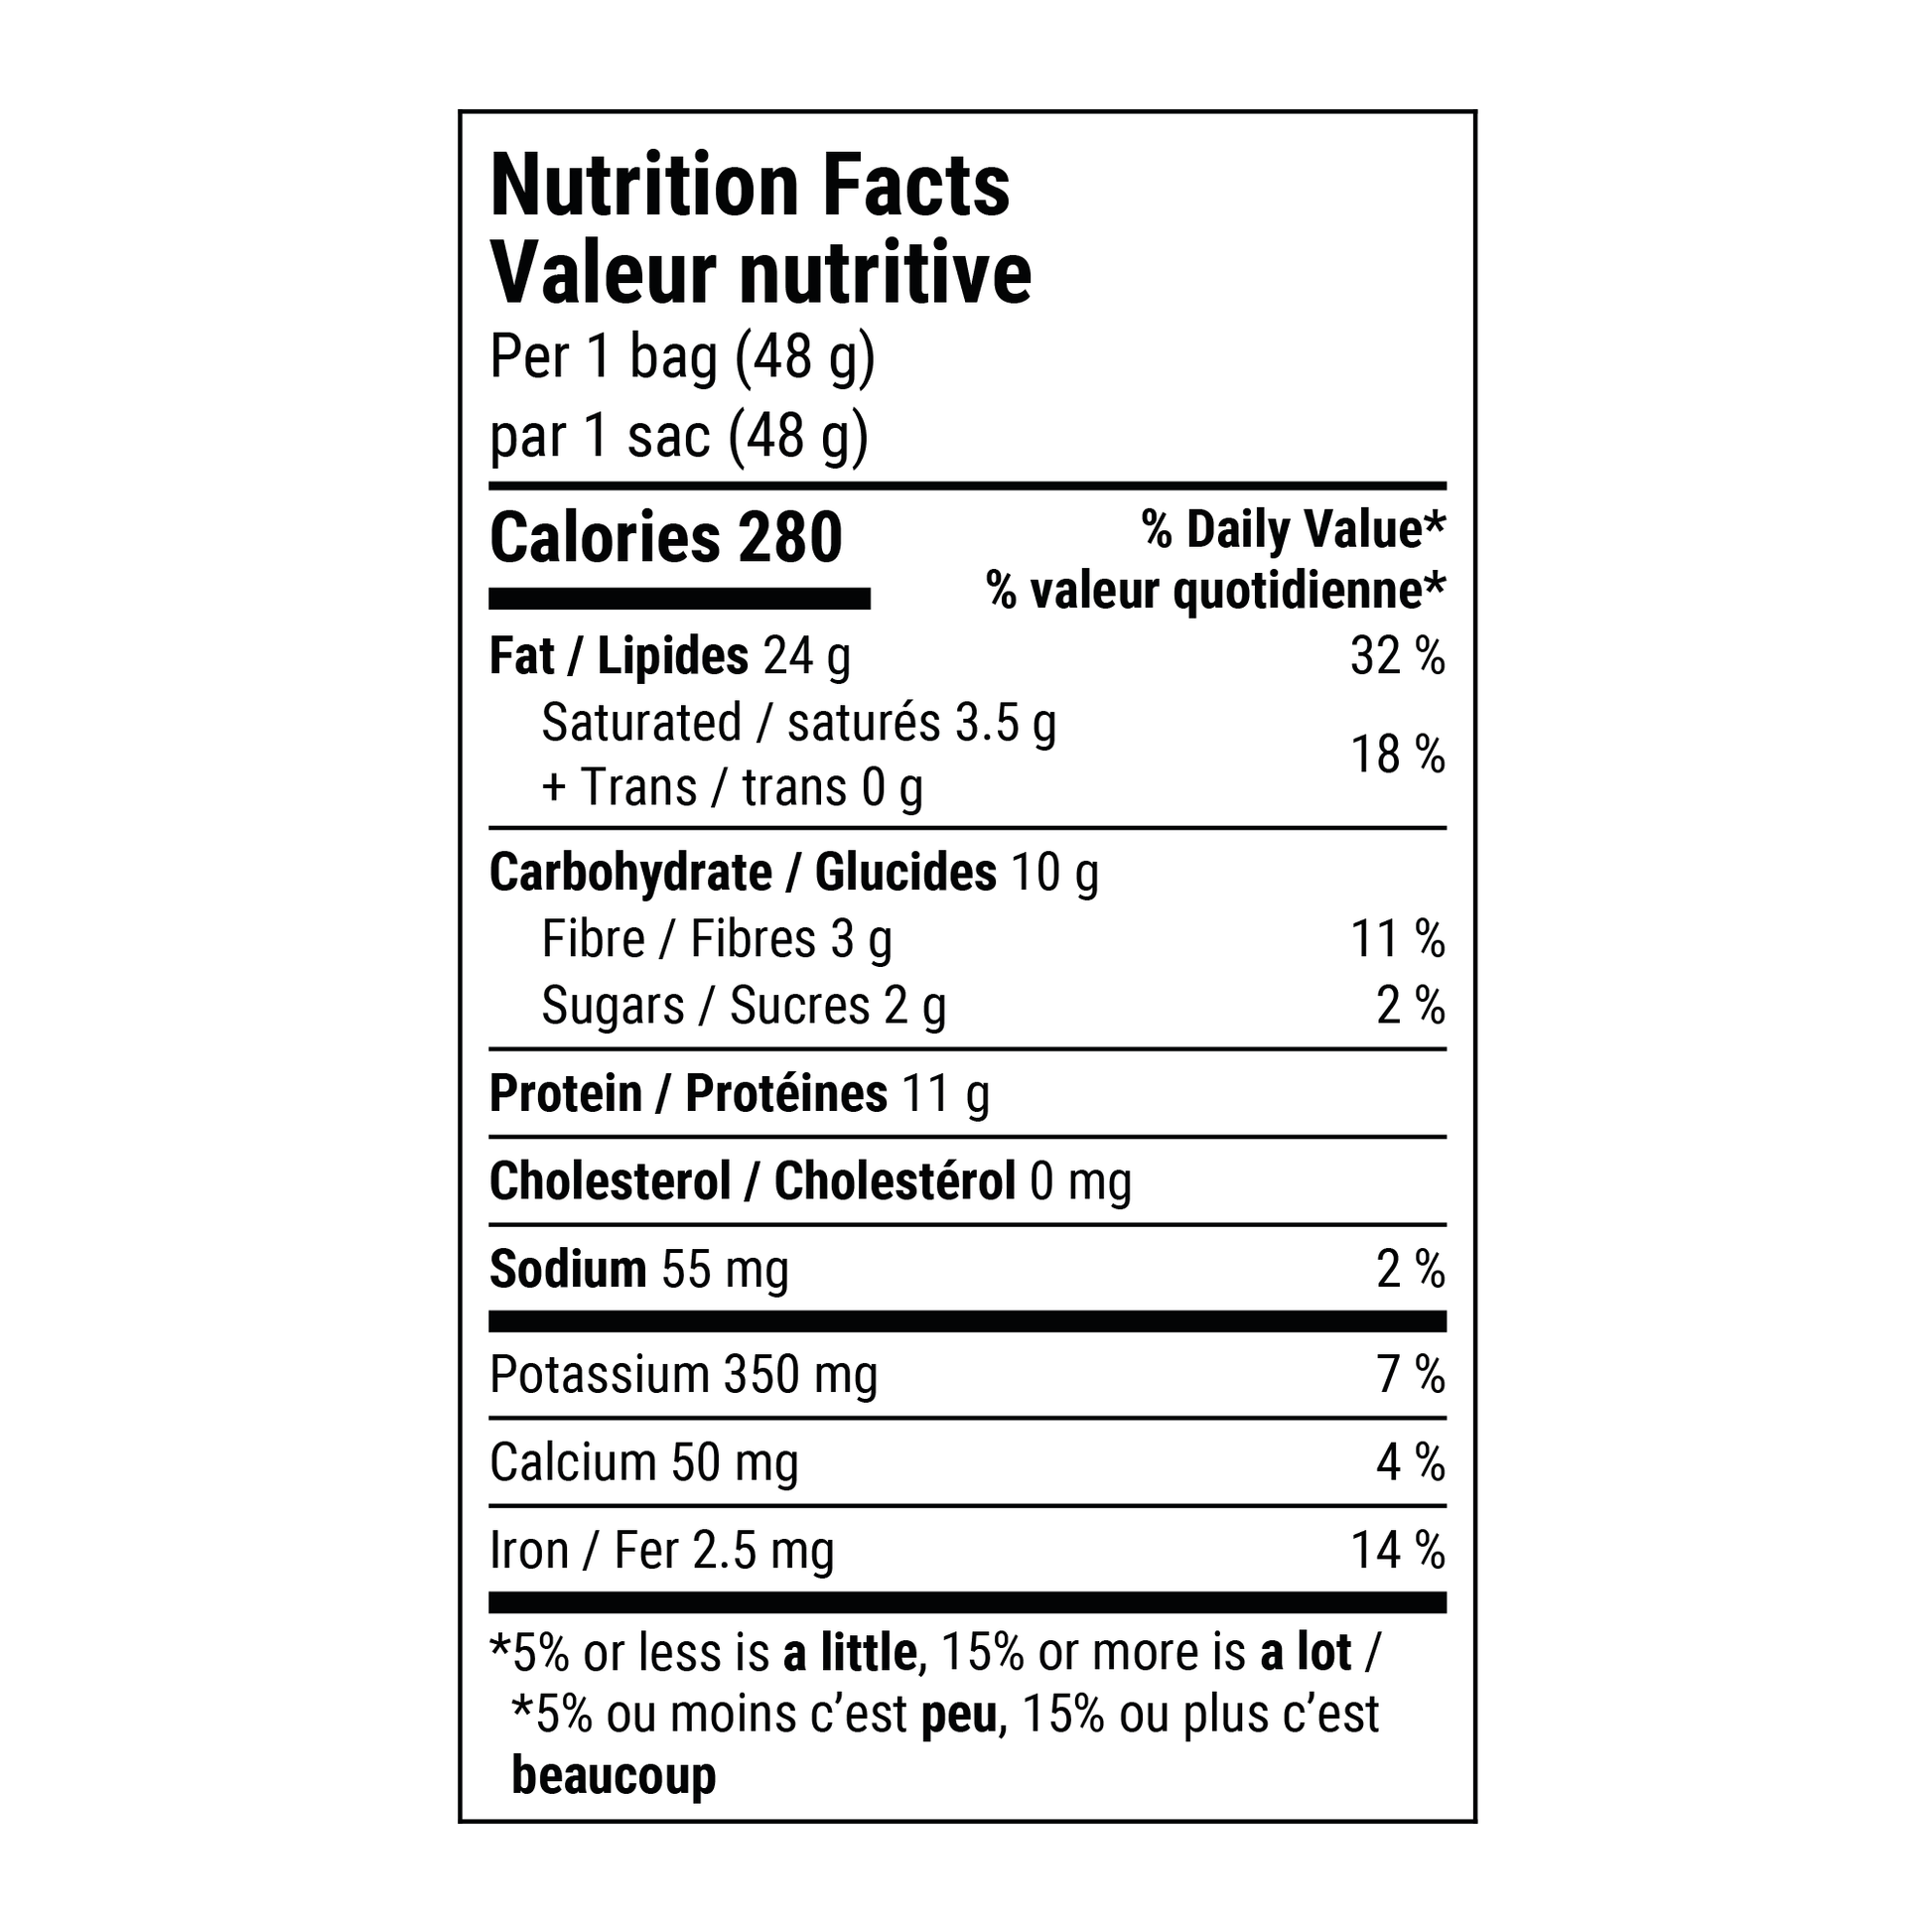 Nutrition Facts - Snack On Nuts Strength Mixed Nuts Single Pouch Serving - Healthy Snacks, Nutrient Dense Foods with 280 calories, 11g of protein, 24g of healthy fat, 10g of carbohydrates, and 55mg of sodium